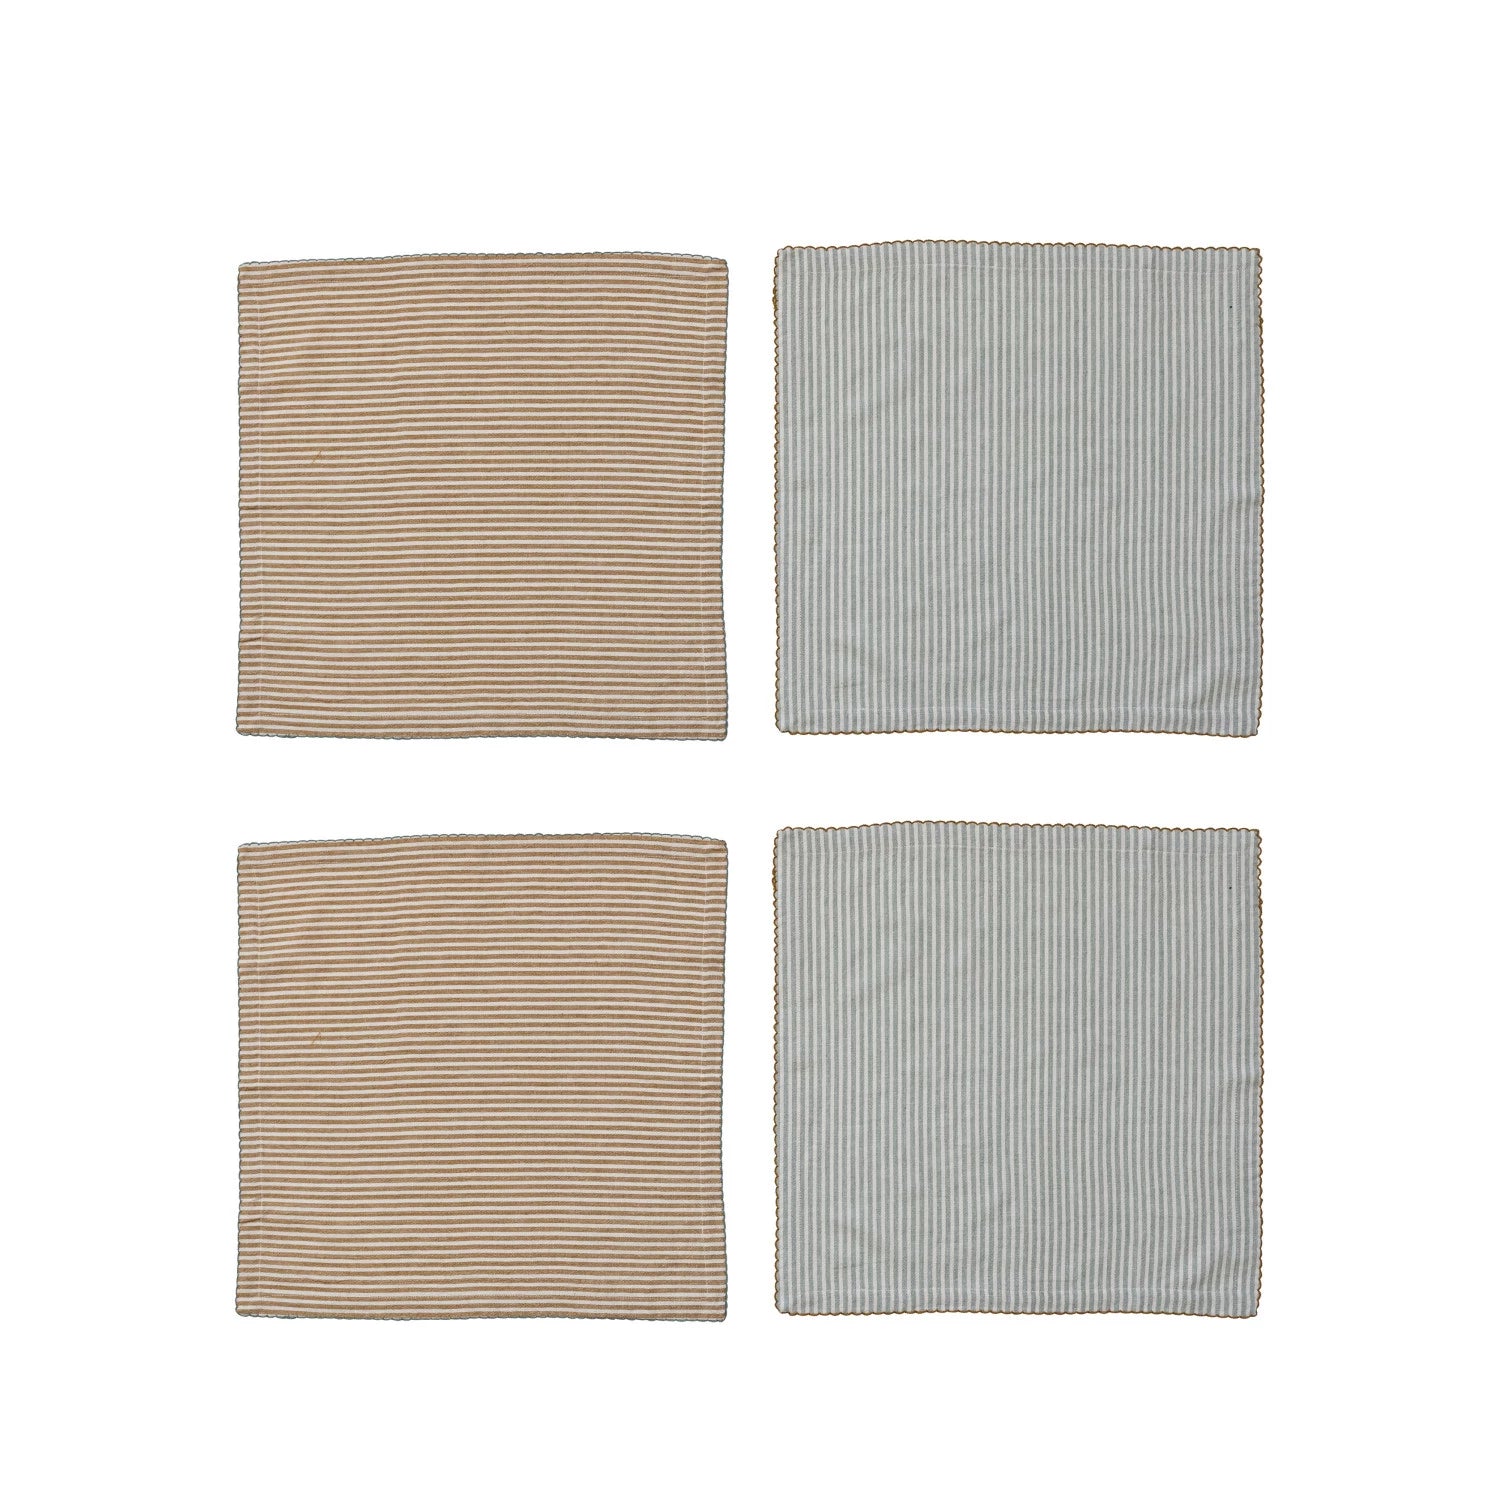 4 napkins in 2 color pallets laying flat on a white background.